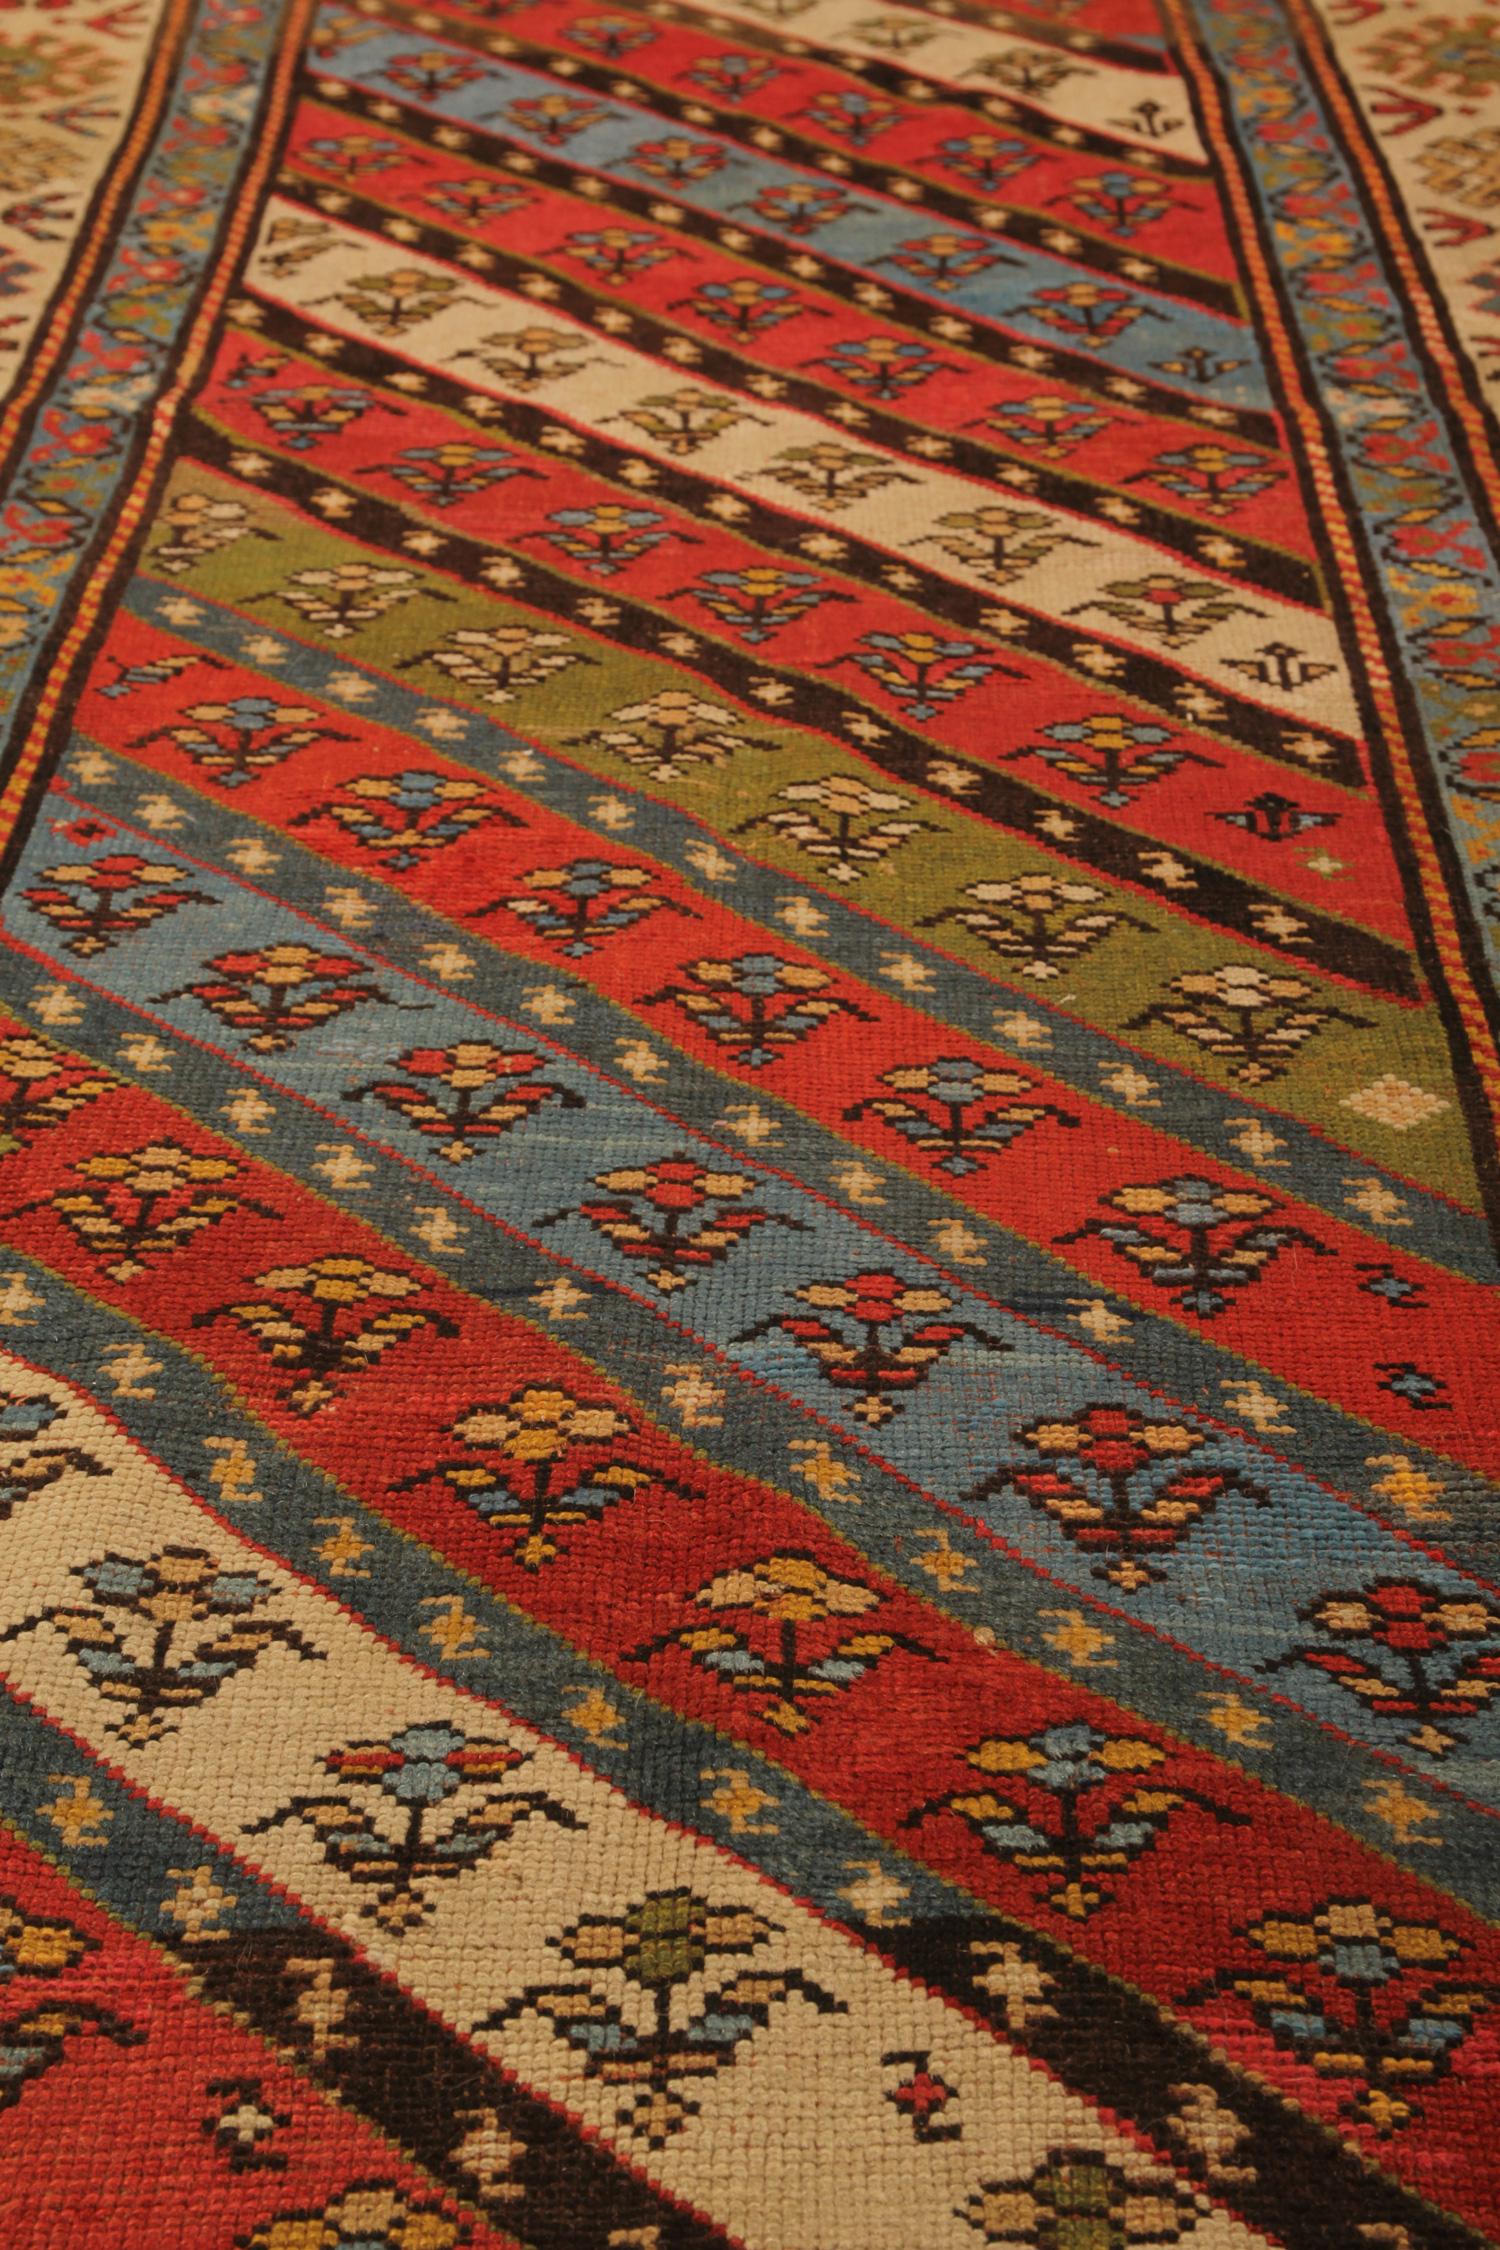 Vegetable Dyed Rare Antique Rug Caucasian Oriental Rug Handmade Striped Shirvan Area Runner For Sale